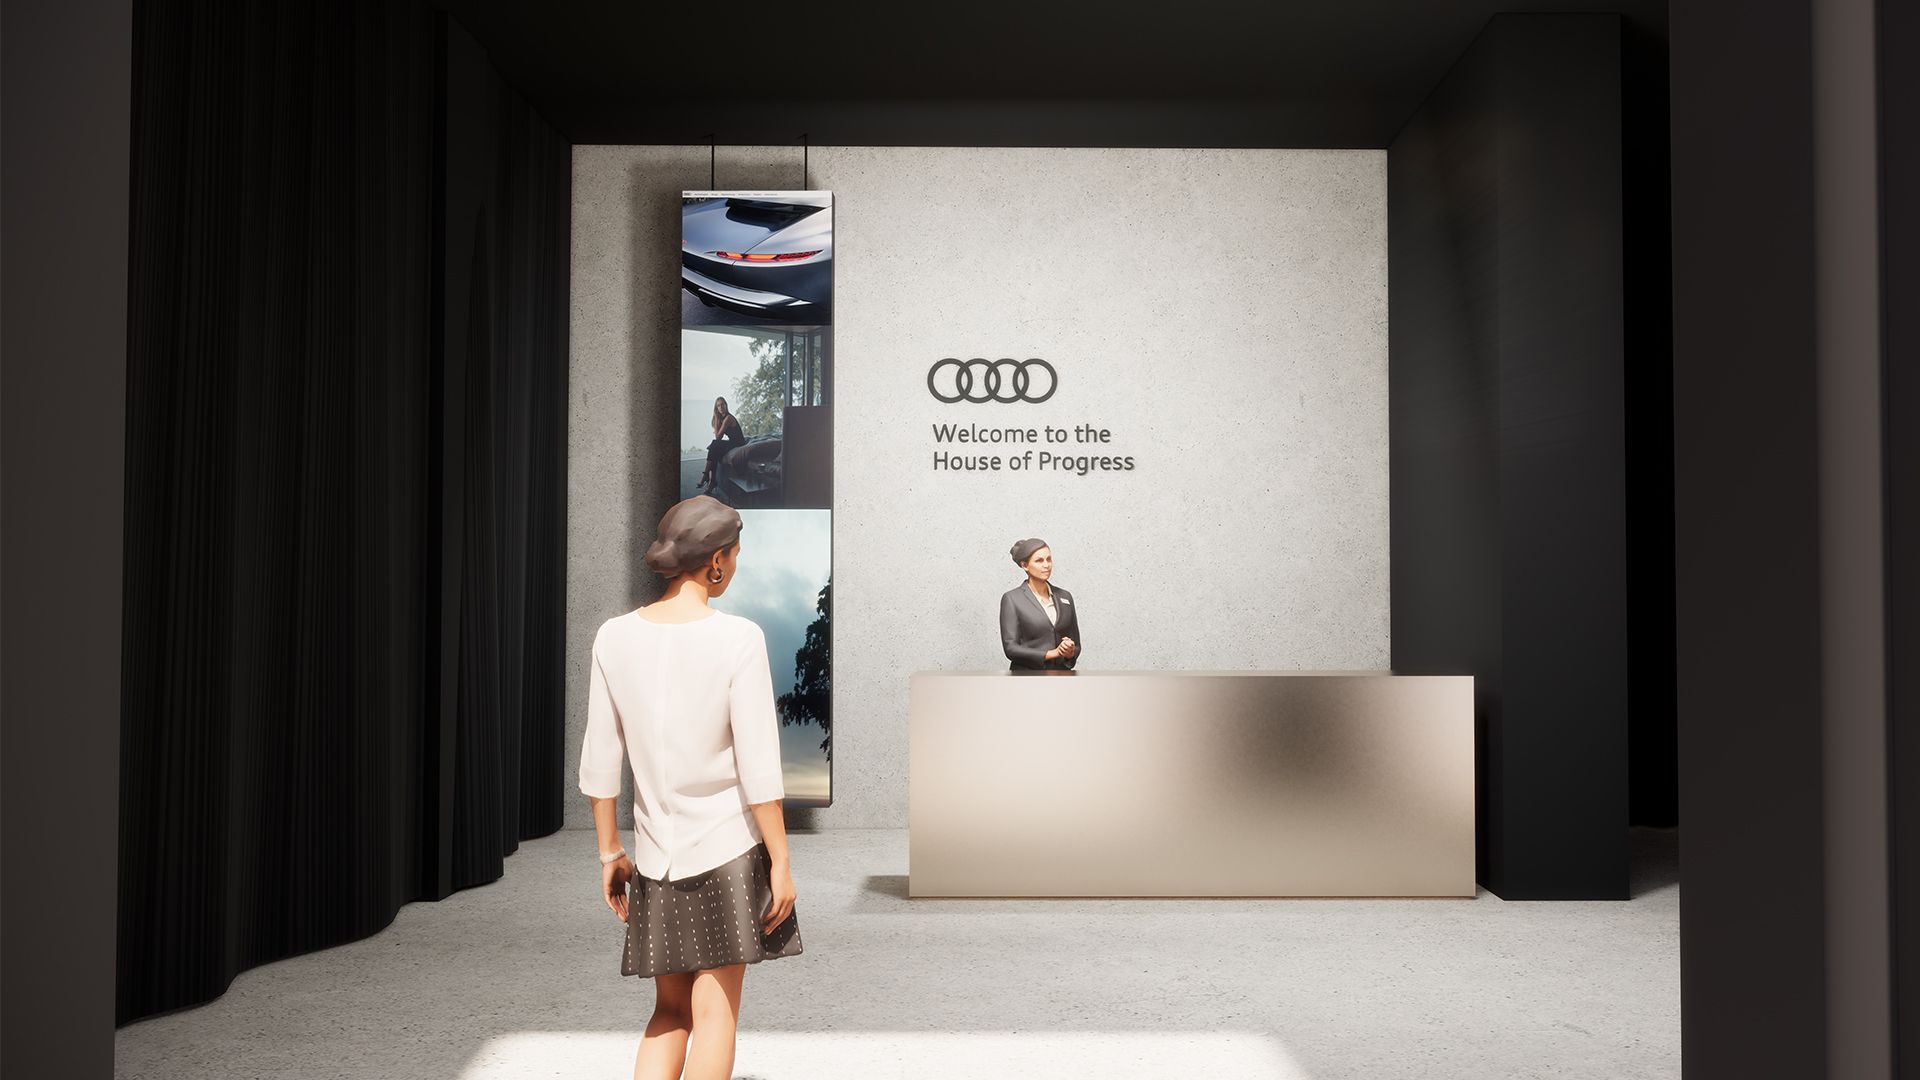 The “Re-generation: the future of progress” vision will be brought to life at the Audi House of Progress. Visitors can learn about the three pillars through various exhibits and panel discussions.